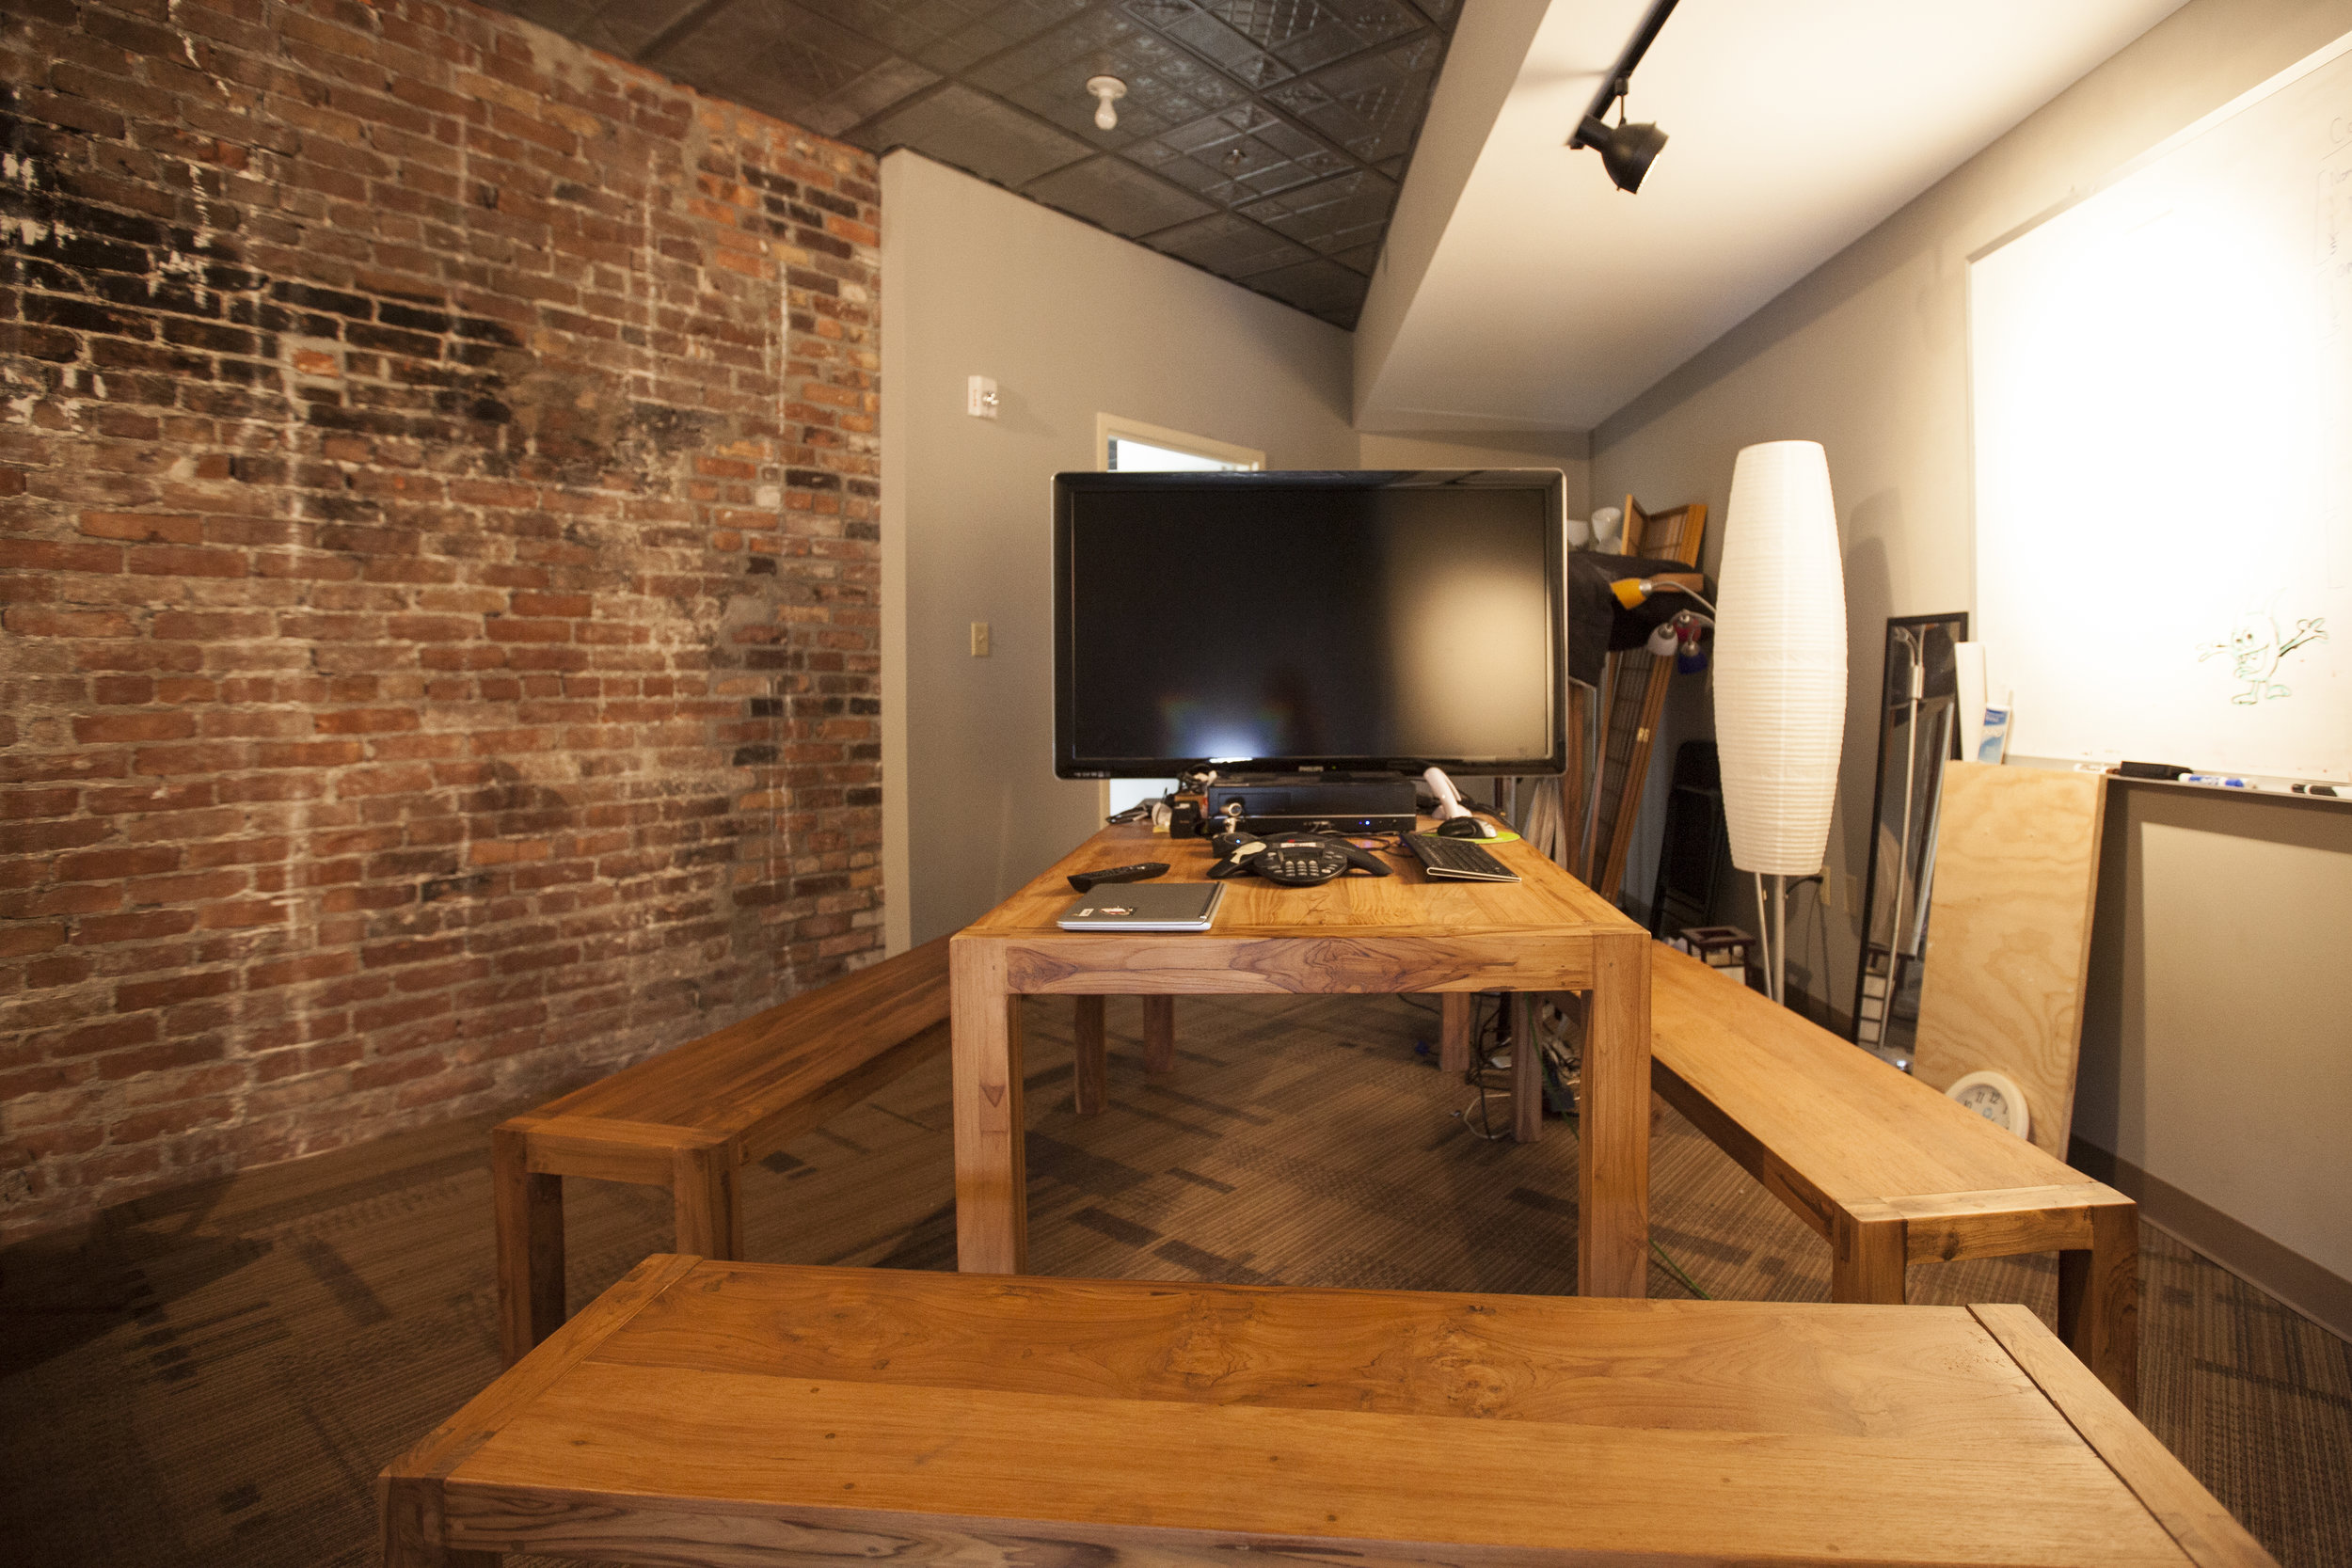  Other small and difficult spaces needed quick and affordable make overs to become meeting spaces. This room has the original brick wall exposed and hardwood furniture installed. 